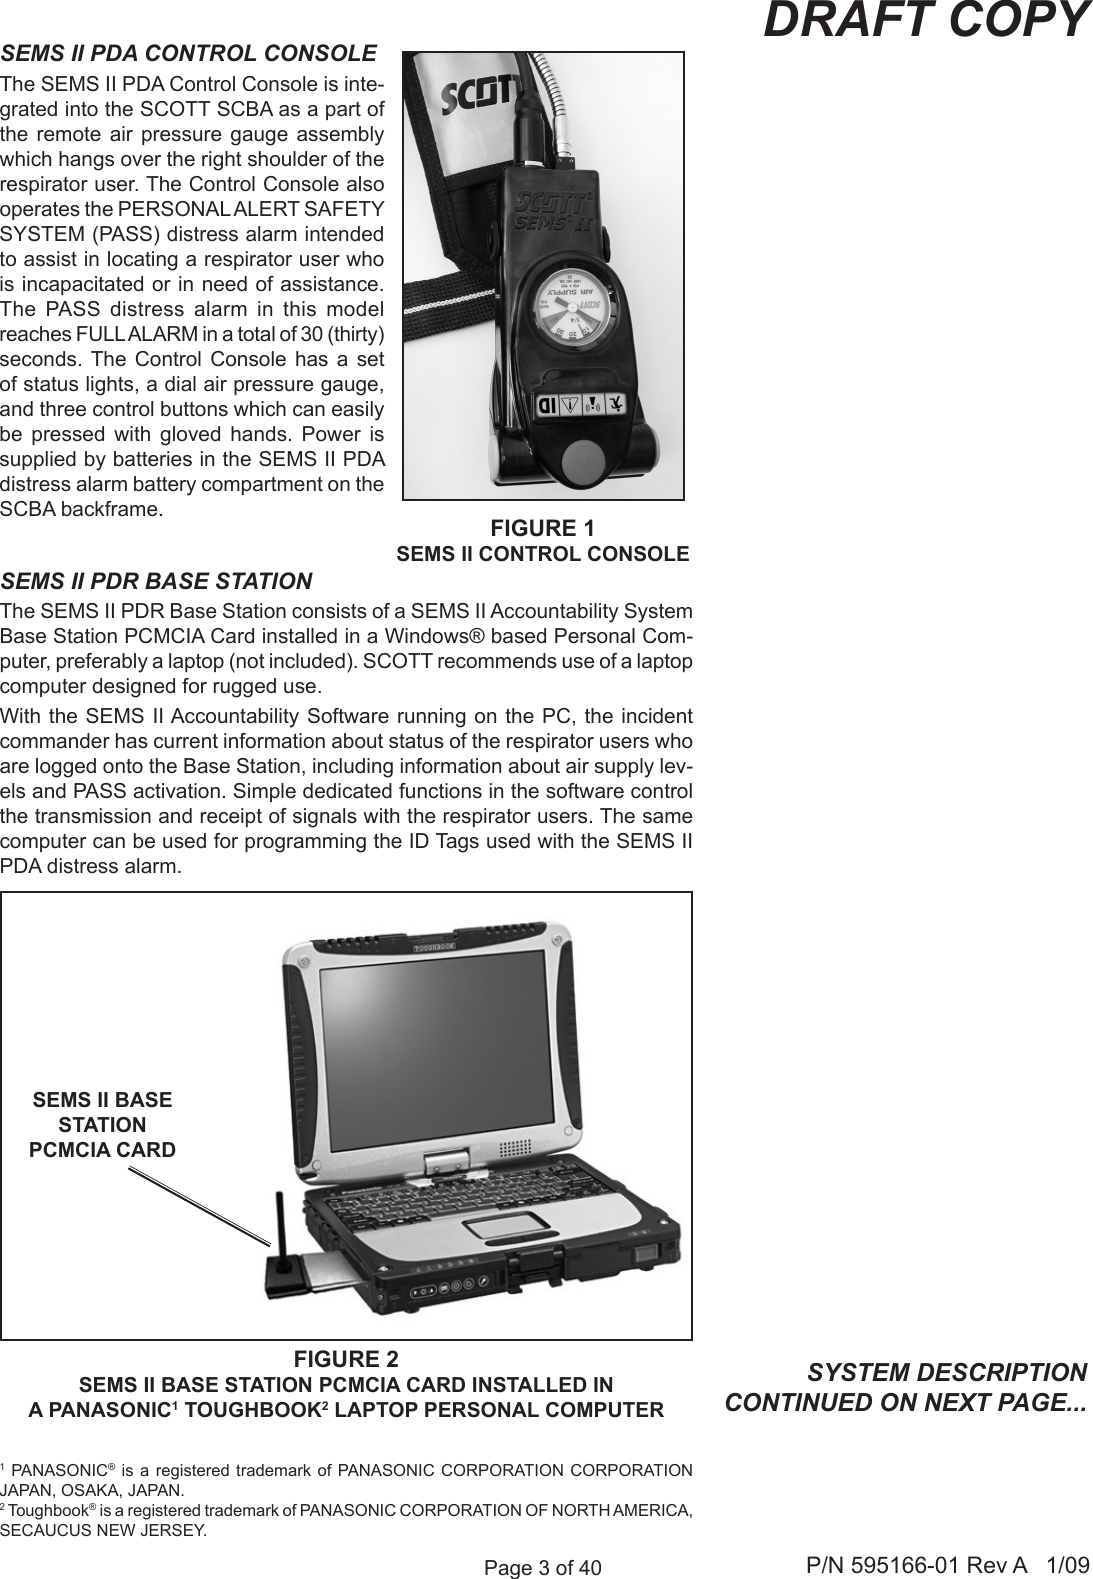 Page 3 of 40 P/N 595166-01 Rev A   1/09DRAFT COPYSEMS II PDR BASE STATIONThe SEMS II PDR Base Station consists of a SEMS II Accountability System Base Station PCMCIA Card installed in a Windows® based Personal Com-puter, preferably a laptop (not included). SCOTT recommends use of a laptop computer designed for rugged use. With the SEMS II Accountability Software running on the PC, the  incident commander has current information about status of the respirator users who are logged onto the Base Station, including information about air supply lev-els and PASS activation. Simple dedicated functions in the software control the transmission and receipt of signals with the respirator users. The same computer can be used for programming the ID Tags used with the SEMS II PDA distress alarm. SYSTEM DESCRIPTION CONTINUED ON NEXT PAGE...FIGURE 2SEMS II BASE STATION PCMCIA CARD INSTALLED IN A PANASONIC1 TOUGHBOOK2 LAPTOP PERSONAL COMPUTERSEMS II BASE STATION PCMCIA CARD SEMS II PDA CONTROL CONSOLEThe SEMS II PDA Control Console is inte-grated into the SCOTT SCBA as a part of the remote air  pressure  gauge  assembly which hangs over the right shoulder of the respirator user. The Control Console also operates the PERSONAL ALERT SAFETY SYSTEM (PASS) distress alarm intended to assist in locating a respirator user who is incapacitated or in need of assistance. The  PASS  distress  alarm  in  this  model reaches FULL ALARM in a total of 30 (thirty) seconds. The  Control  Console  has  a  set of status lights, a dial air pressure gauge, and three control buttons which can easily be  pressed  with  gloved  hands.  Power  is supplied by batteries in the SEMS II PDA distress alarm battery compartment on the SCBA backframe. FIGURE 1SEMS II CONTROL CONSOLE1 PANASONIC®  is  a registered trademark of PANASONIC  CORPORATION  CORPORATION JAPAN, OSAKA, JAPAN.2 Toughbook® is a registered trademark of PANASONIC CORPORATION OF NORTH AMERICA, SECAUCUS NEW JERSEY.